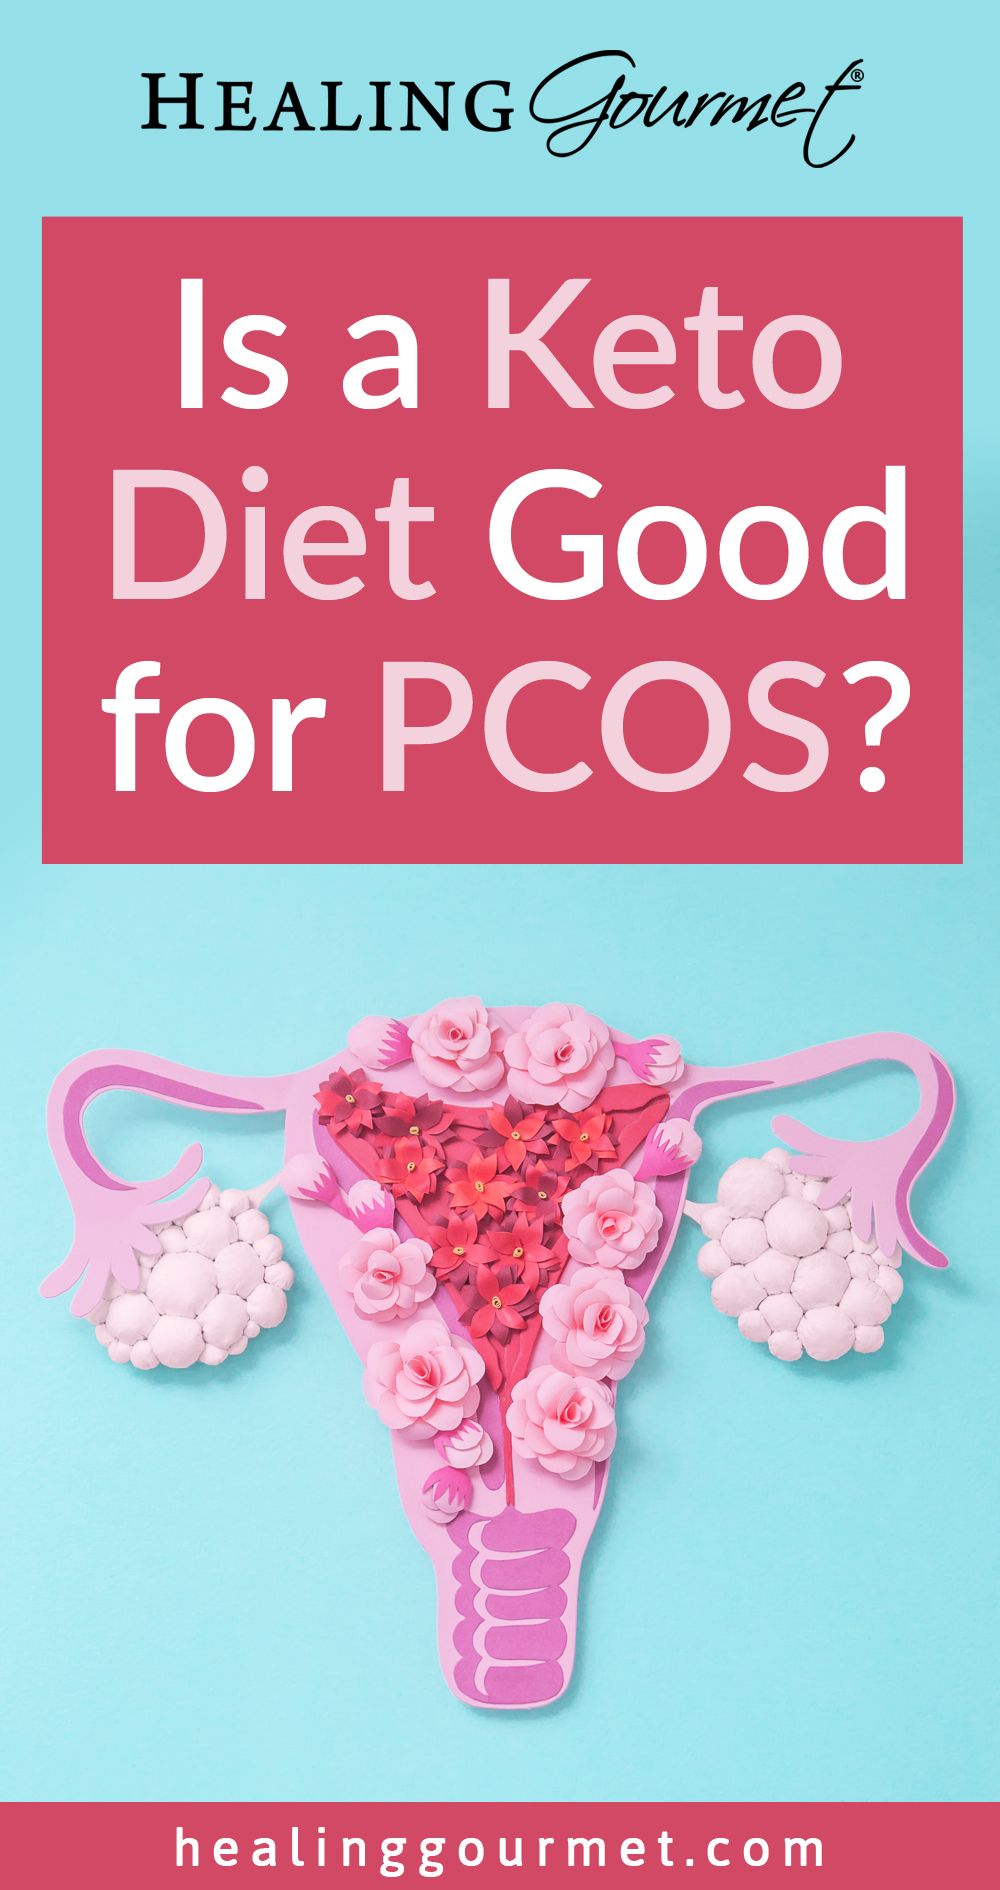 The Keto Diet for PCOS